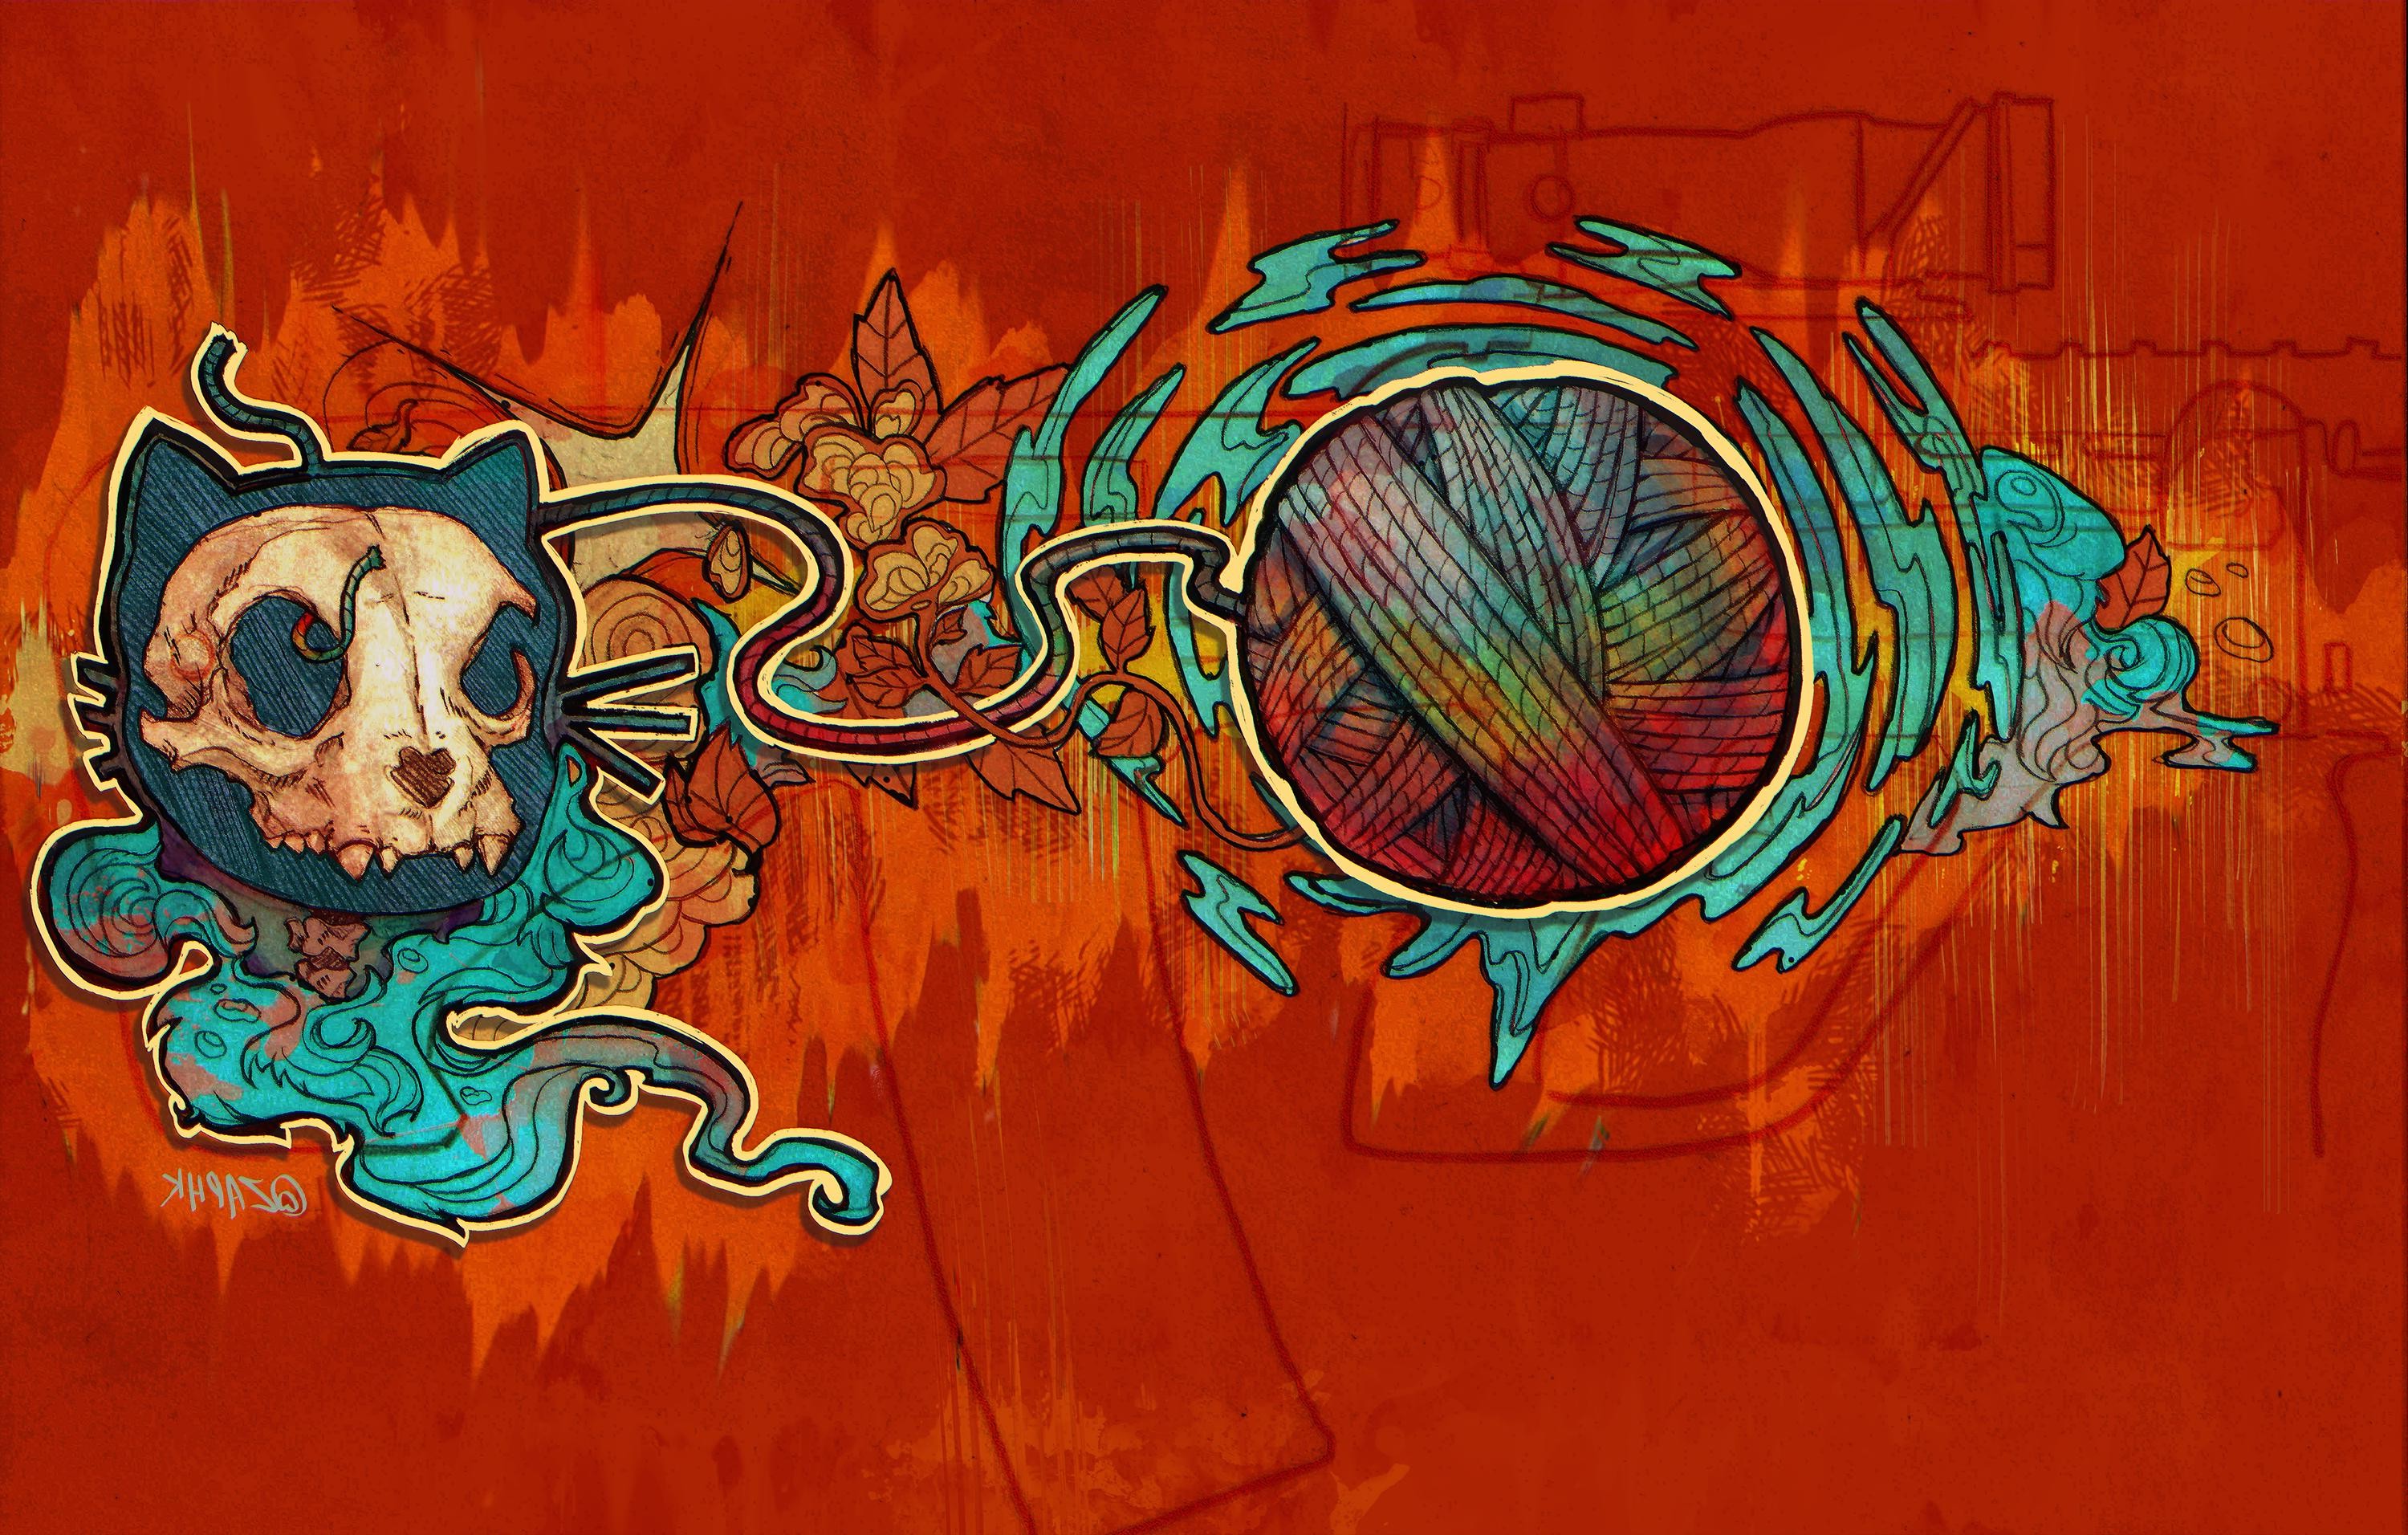 cat, Abstract, Yarn, Skull, Weapon, Gun, Leaves, Colorful Wallpaper